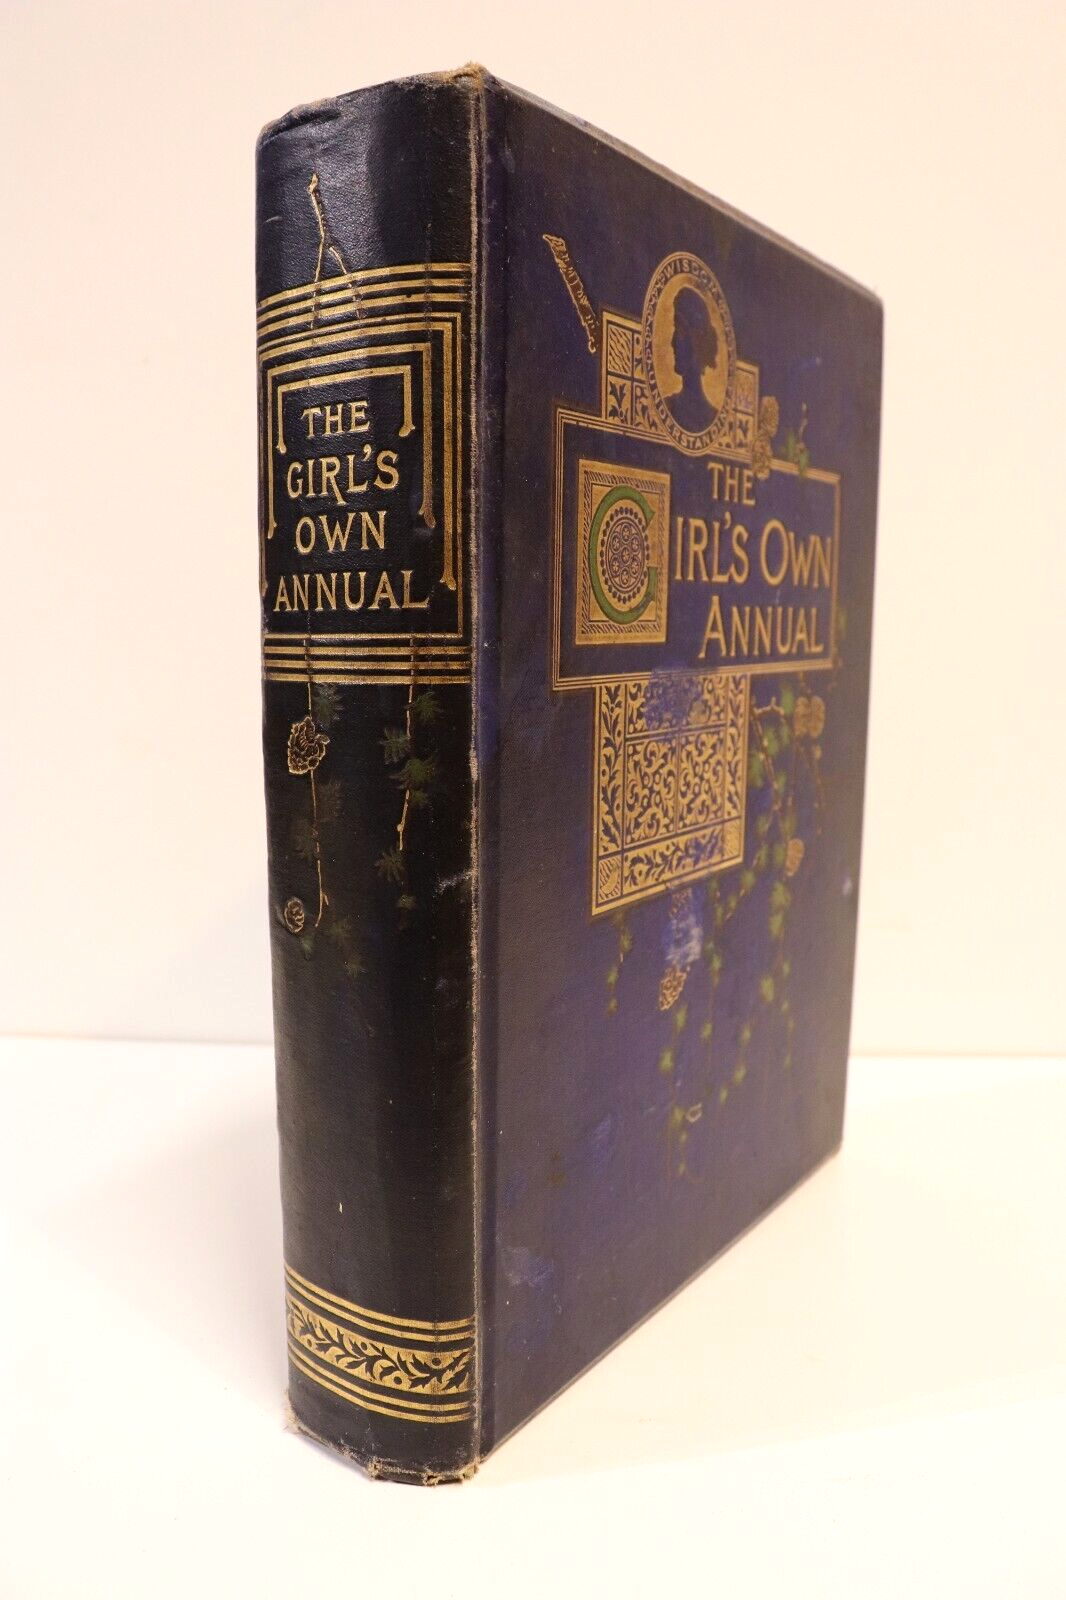 The Girl's Own Annual - 1892 - Antique Children's Book